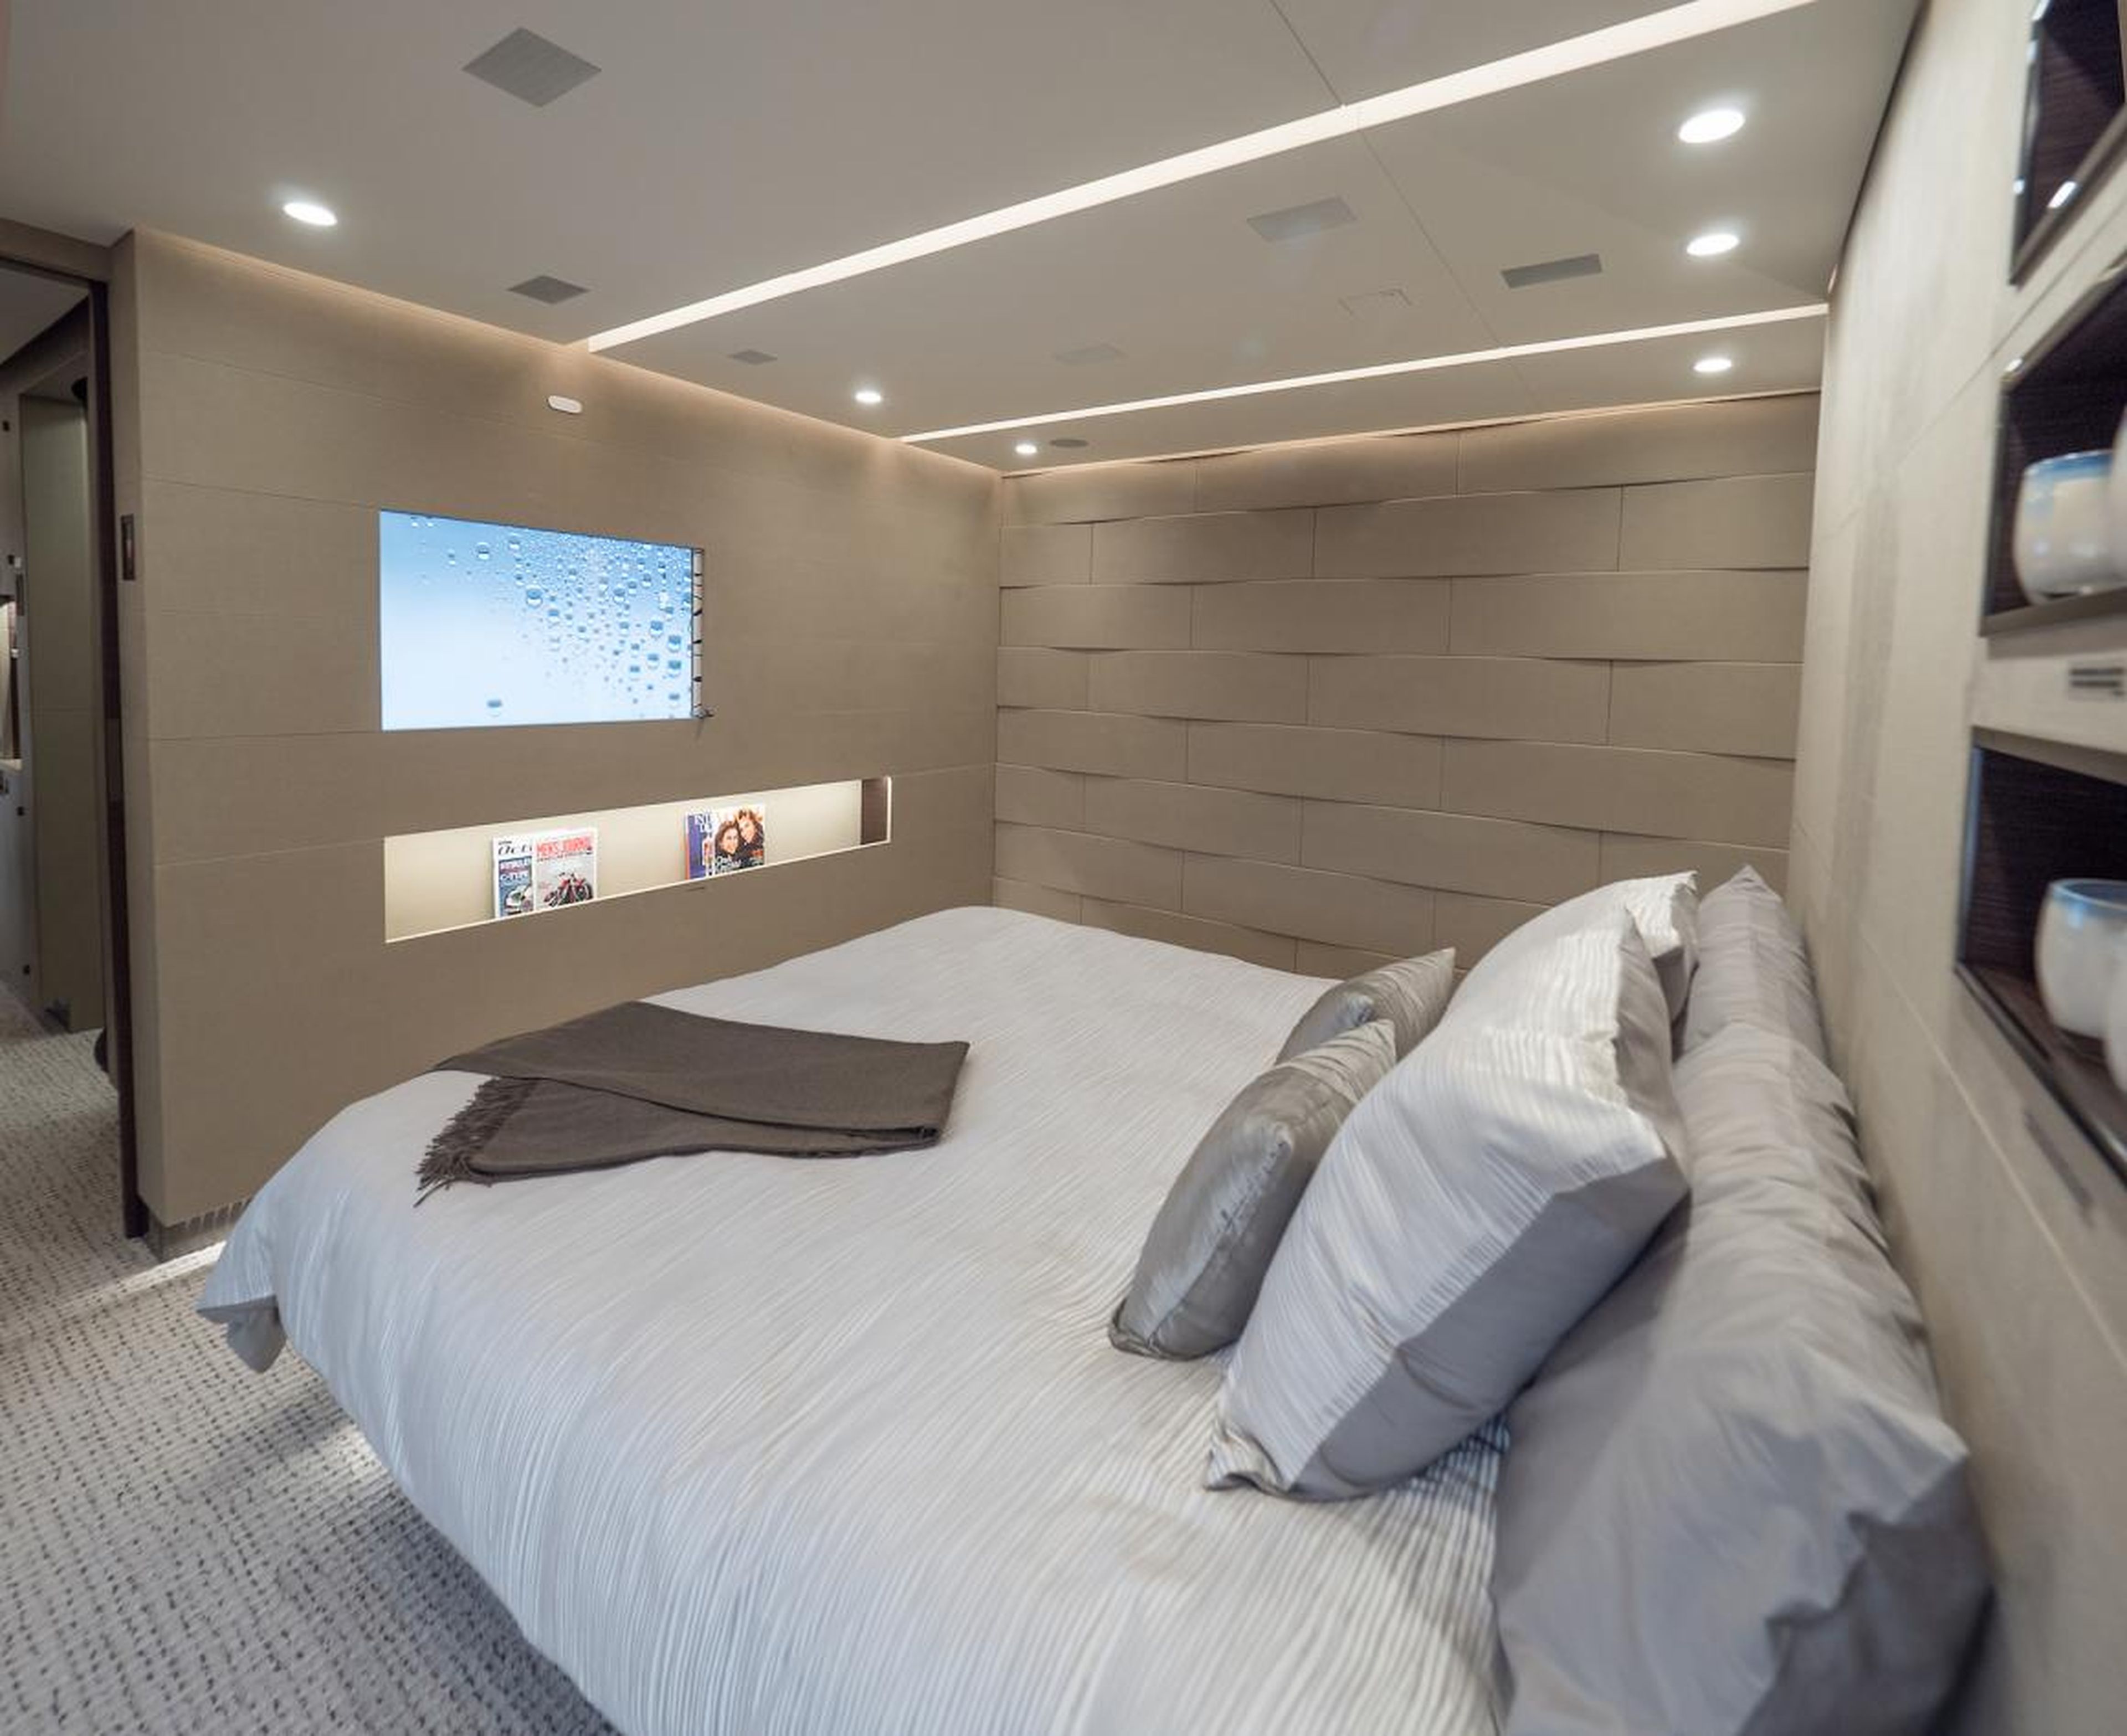 There's also a master suite with a California king bed, a walk-in closet ...